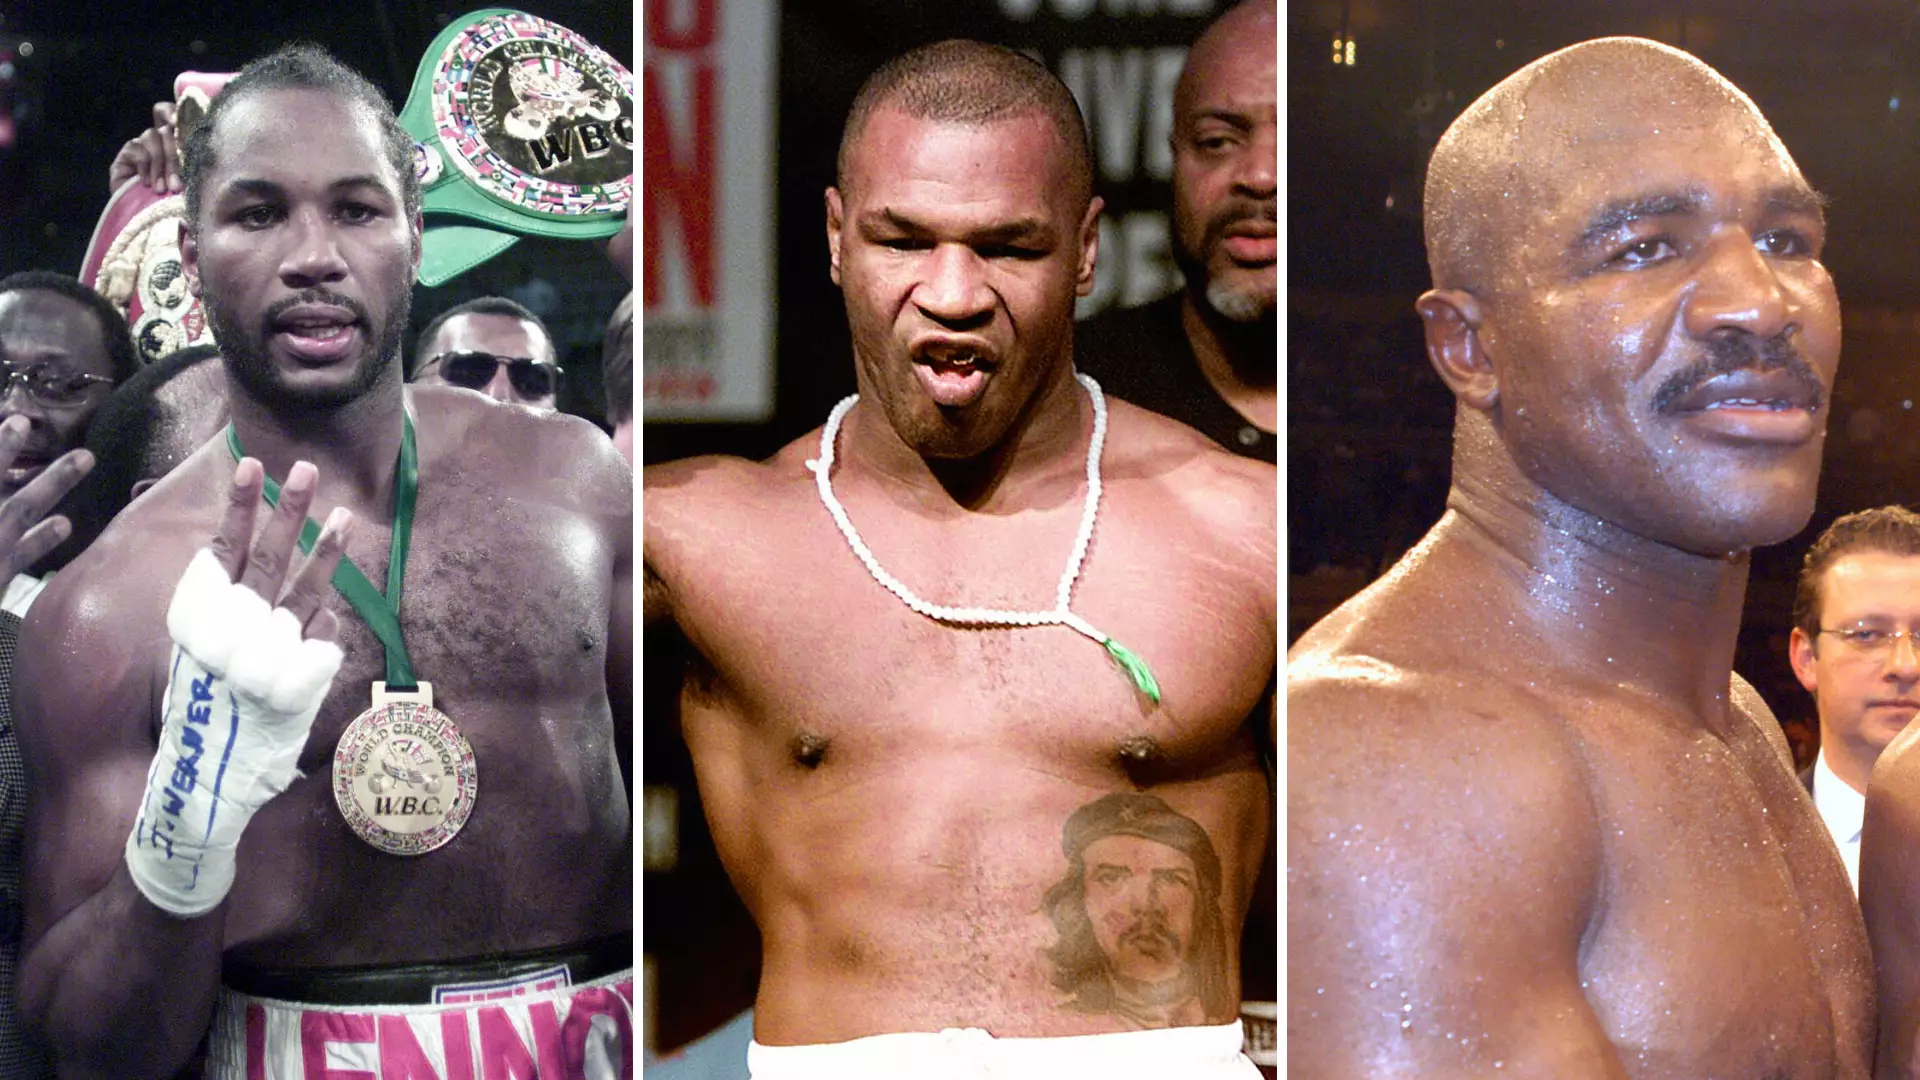 Ring Magazine’s 2004 Predictions For Boxers To Replace Mike Tyson, Lennox Lewis And Evander Holyfield